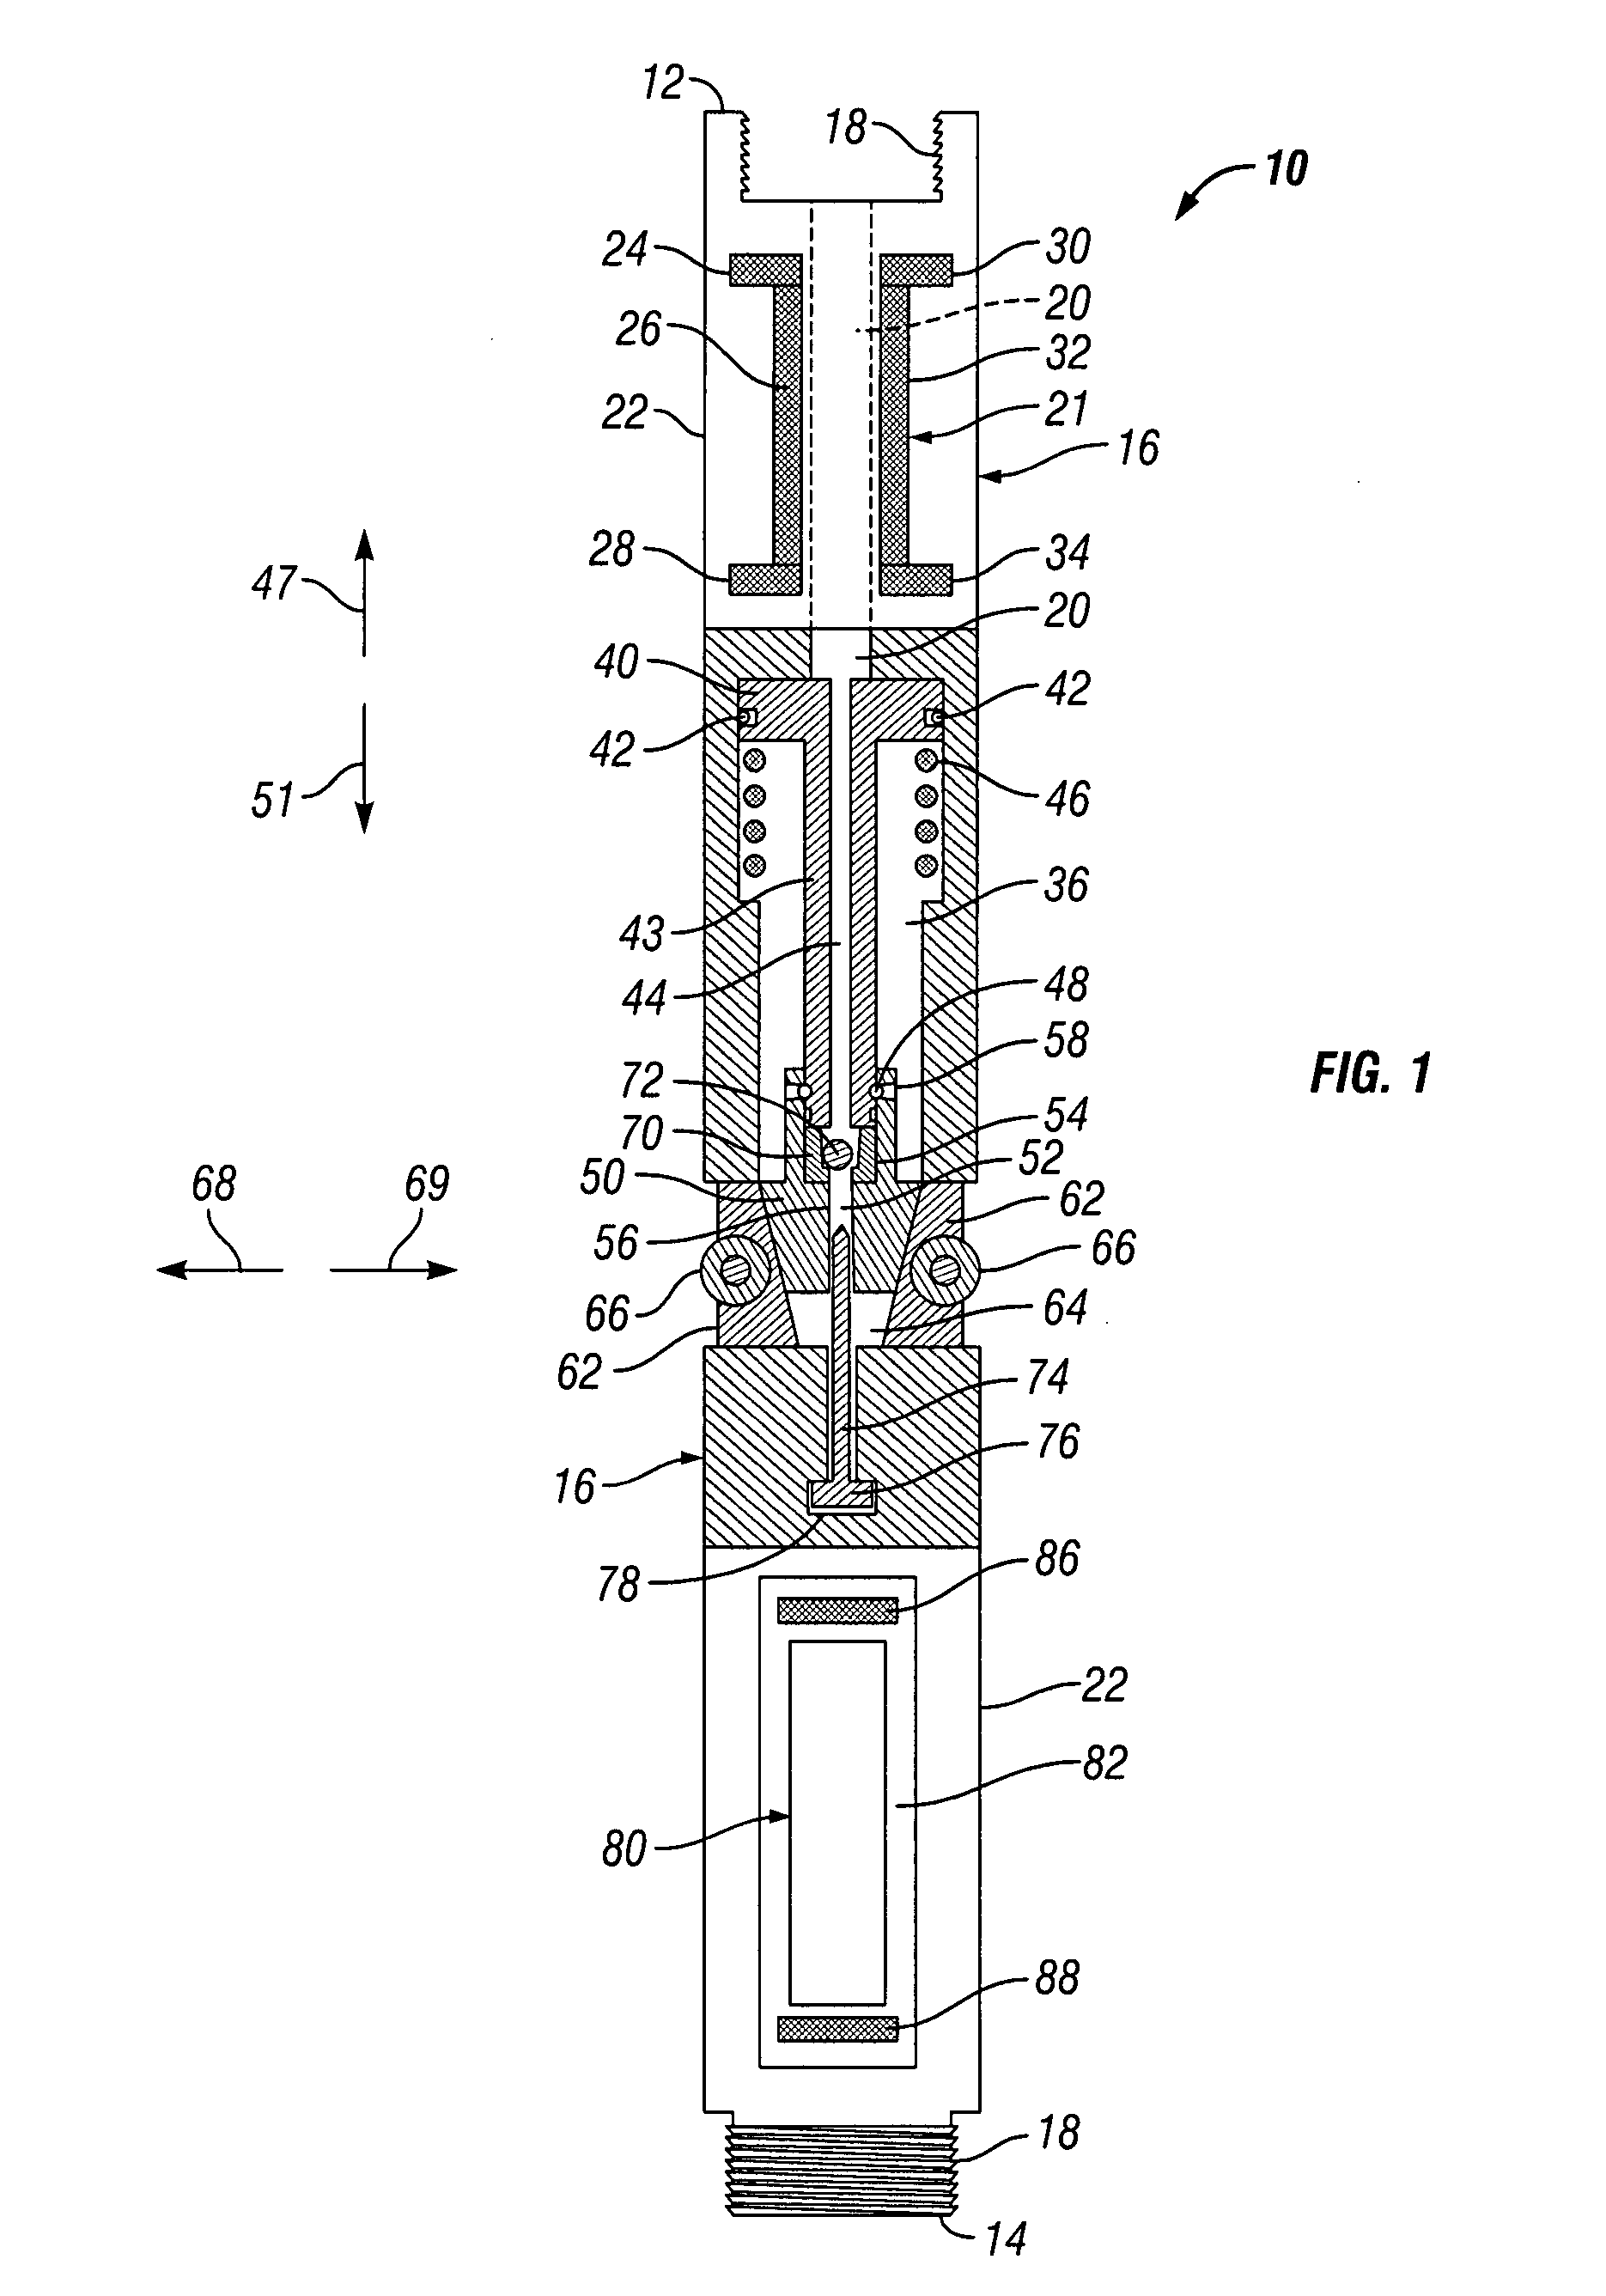 Casing profiling and recovery system